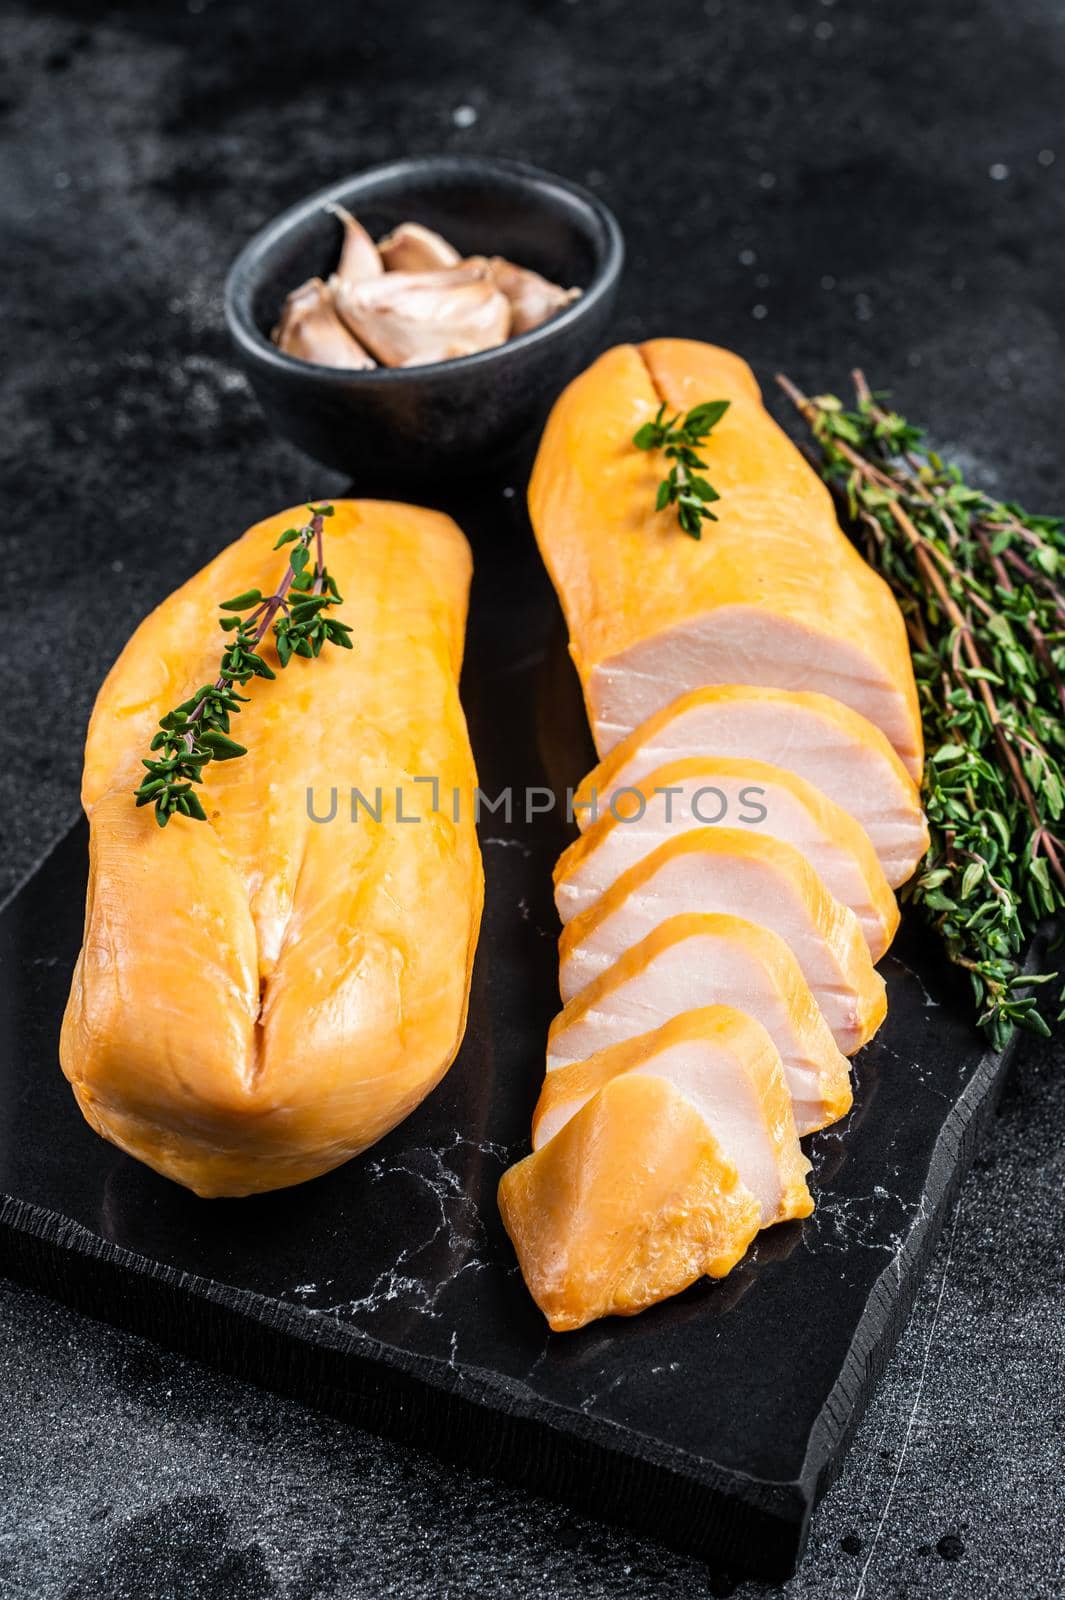 Smoked cut chicken breast fillet meat delicacy. Black background. Top view by Composter